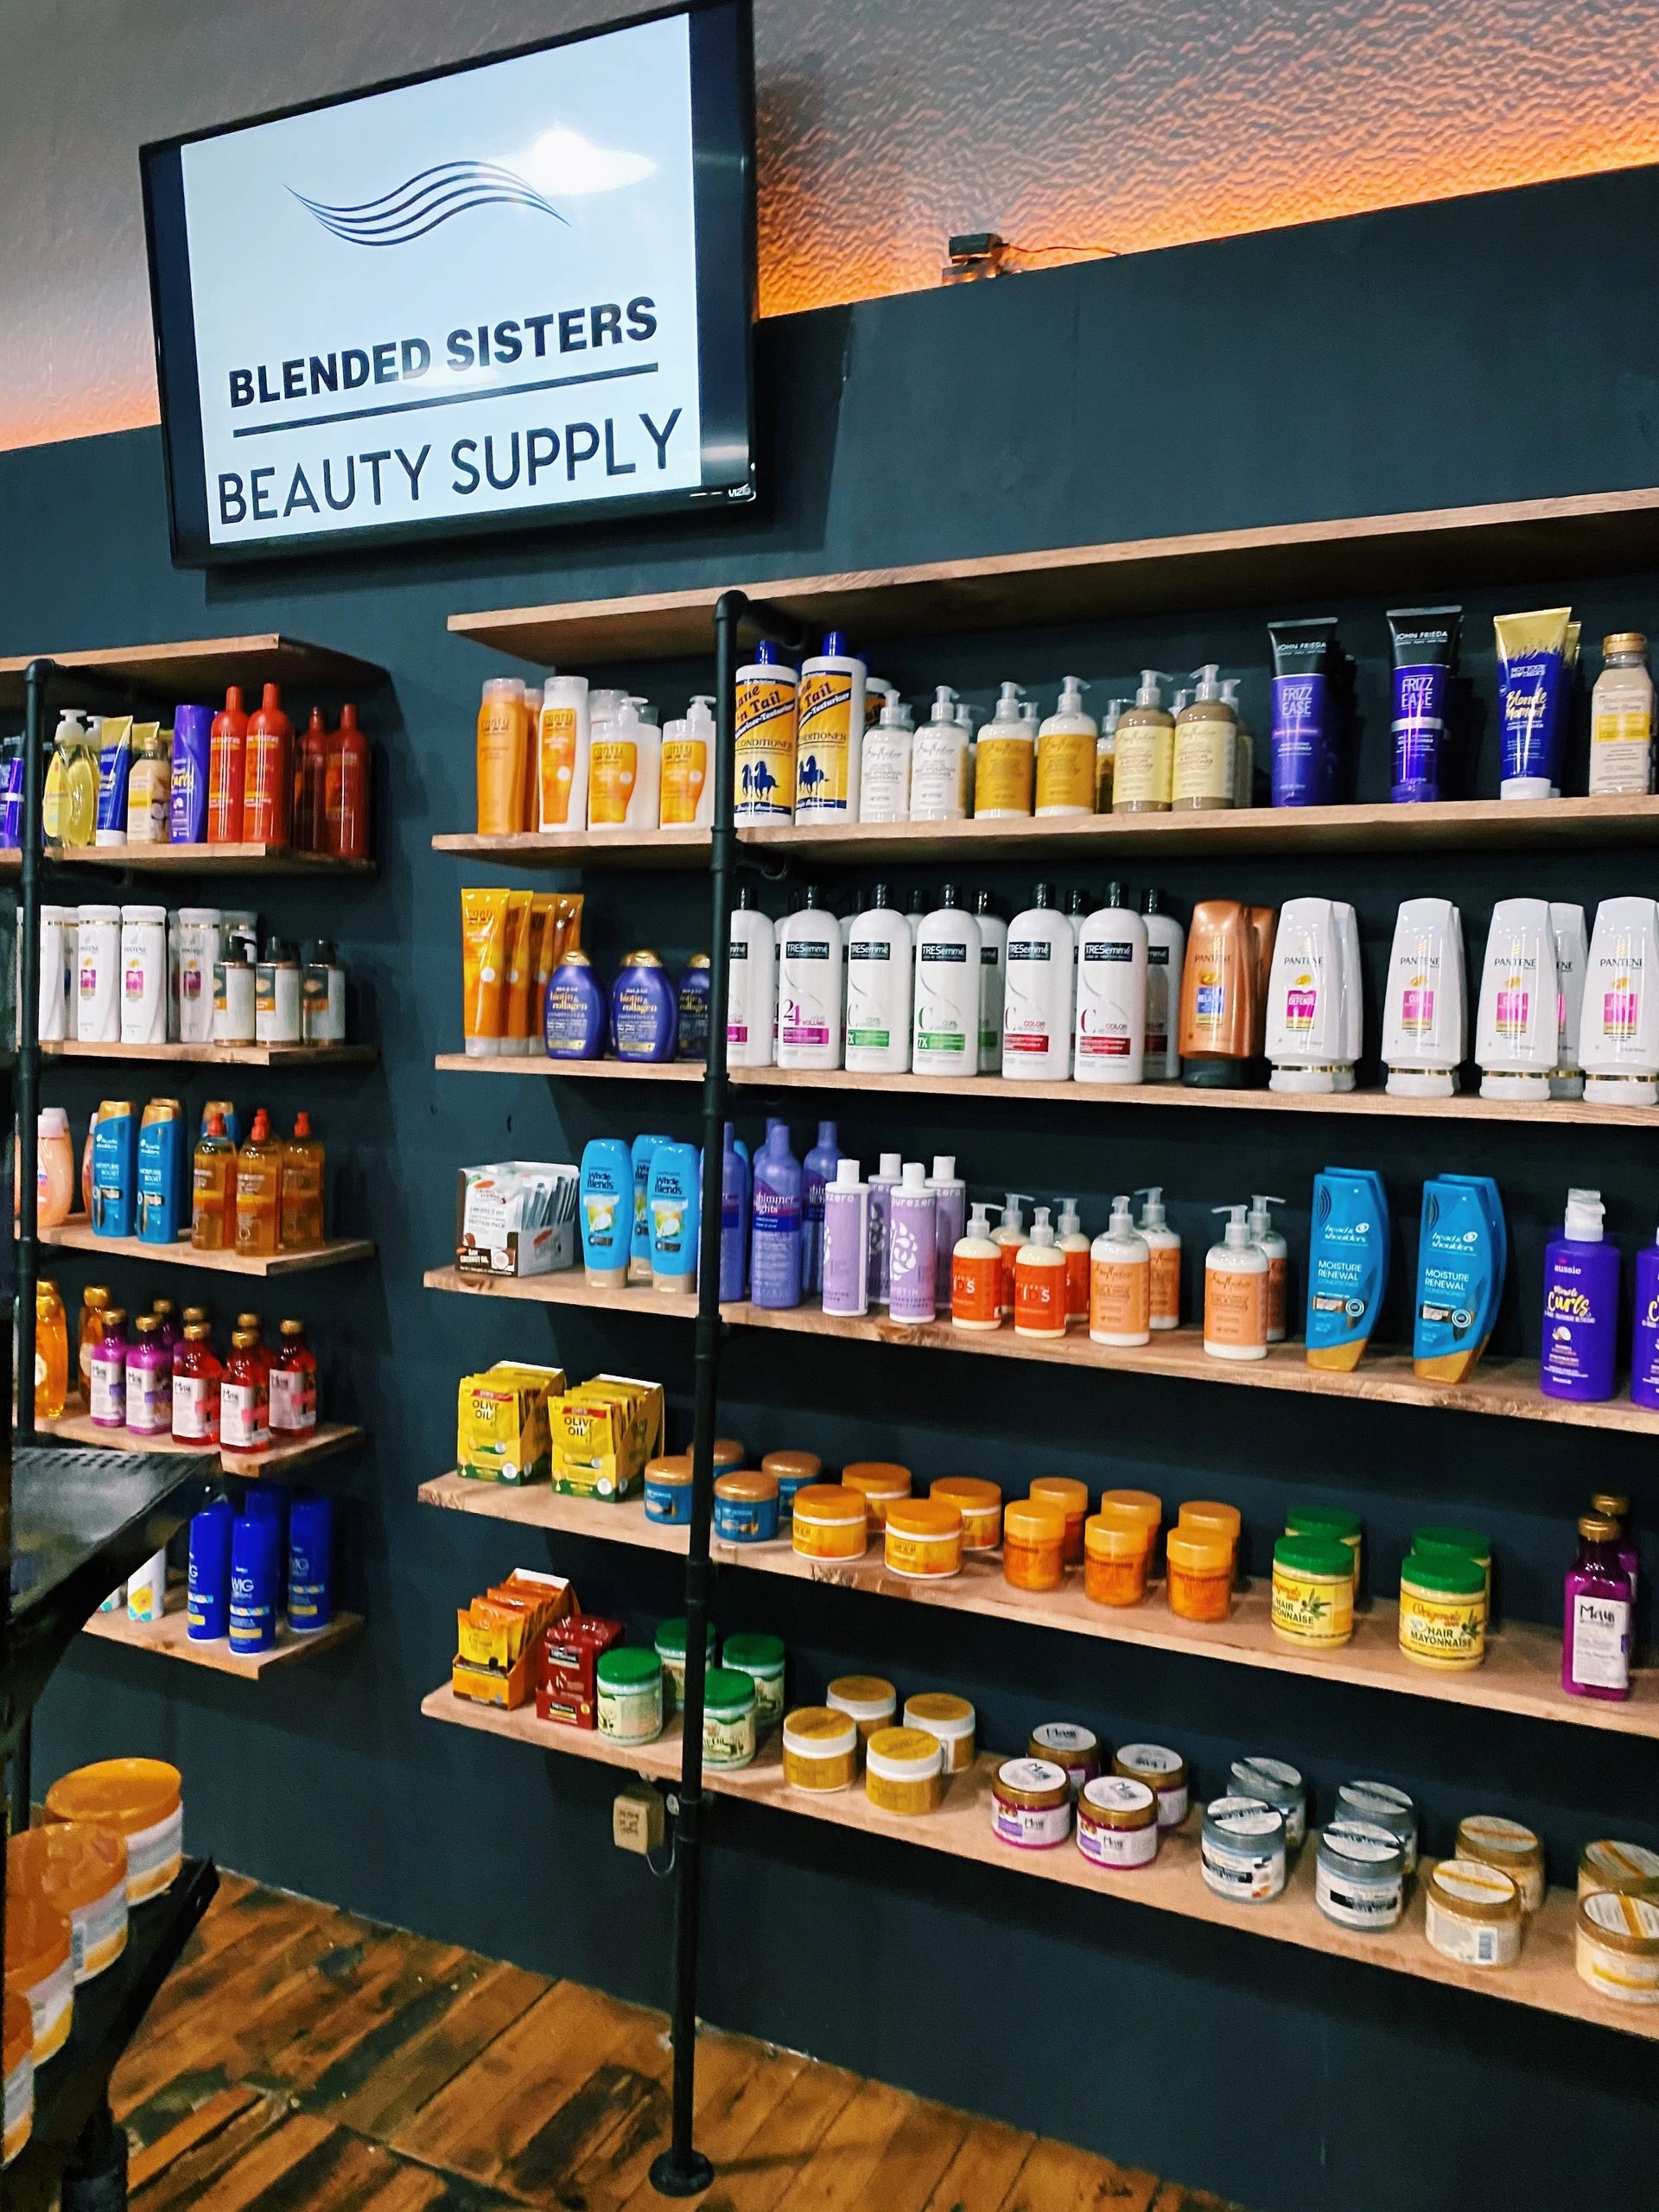 Blended Sisters Beauty Supply